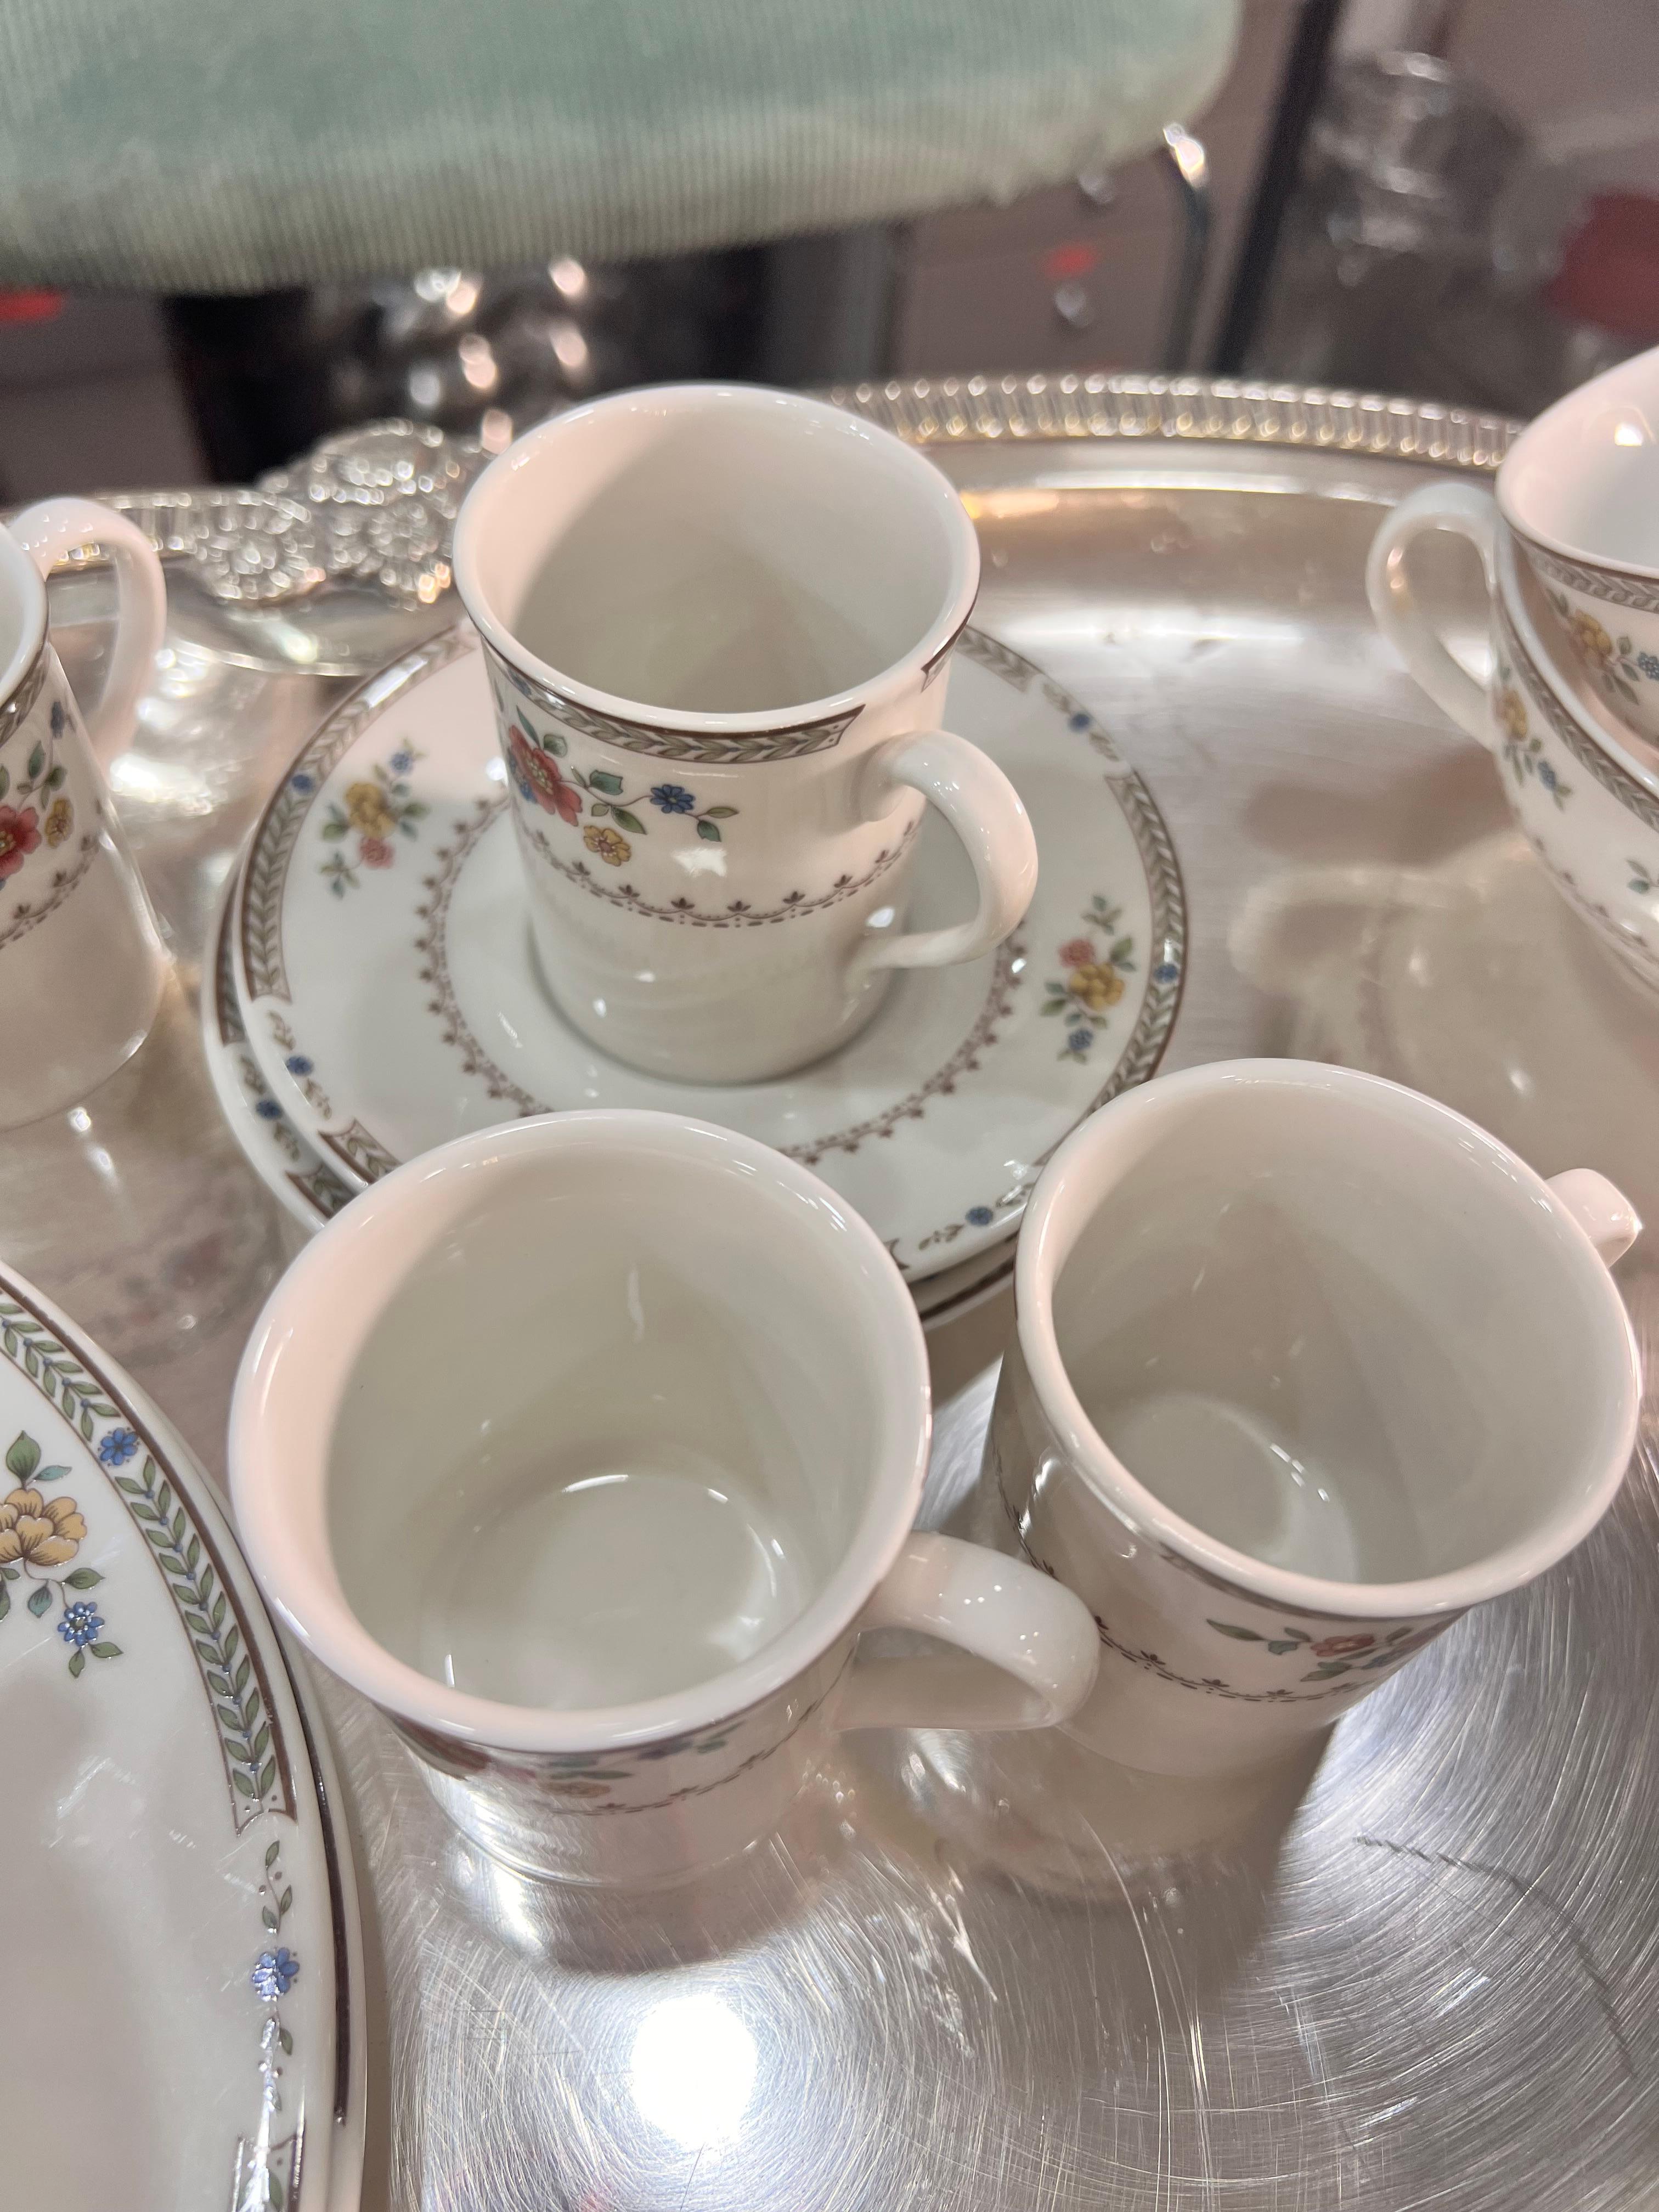 4x espresso coffee cups
3x espresso coffee saucers 5” 
2x breakfast / lunch plates 9 1/4”
9 pieces at 15€ each Total 135€  

PRADERA is a second generation of a family run business jewelers of reference in Spain, with a rich track record being